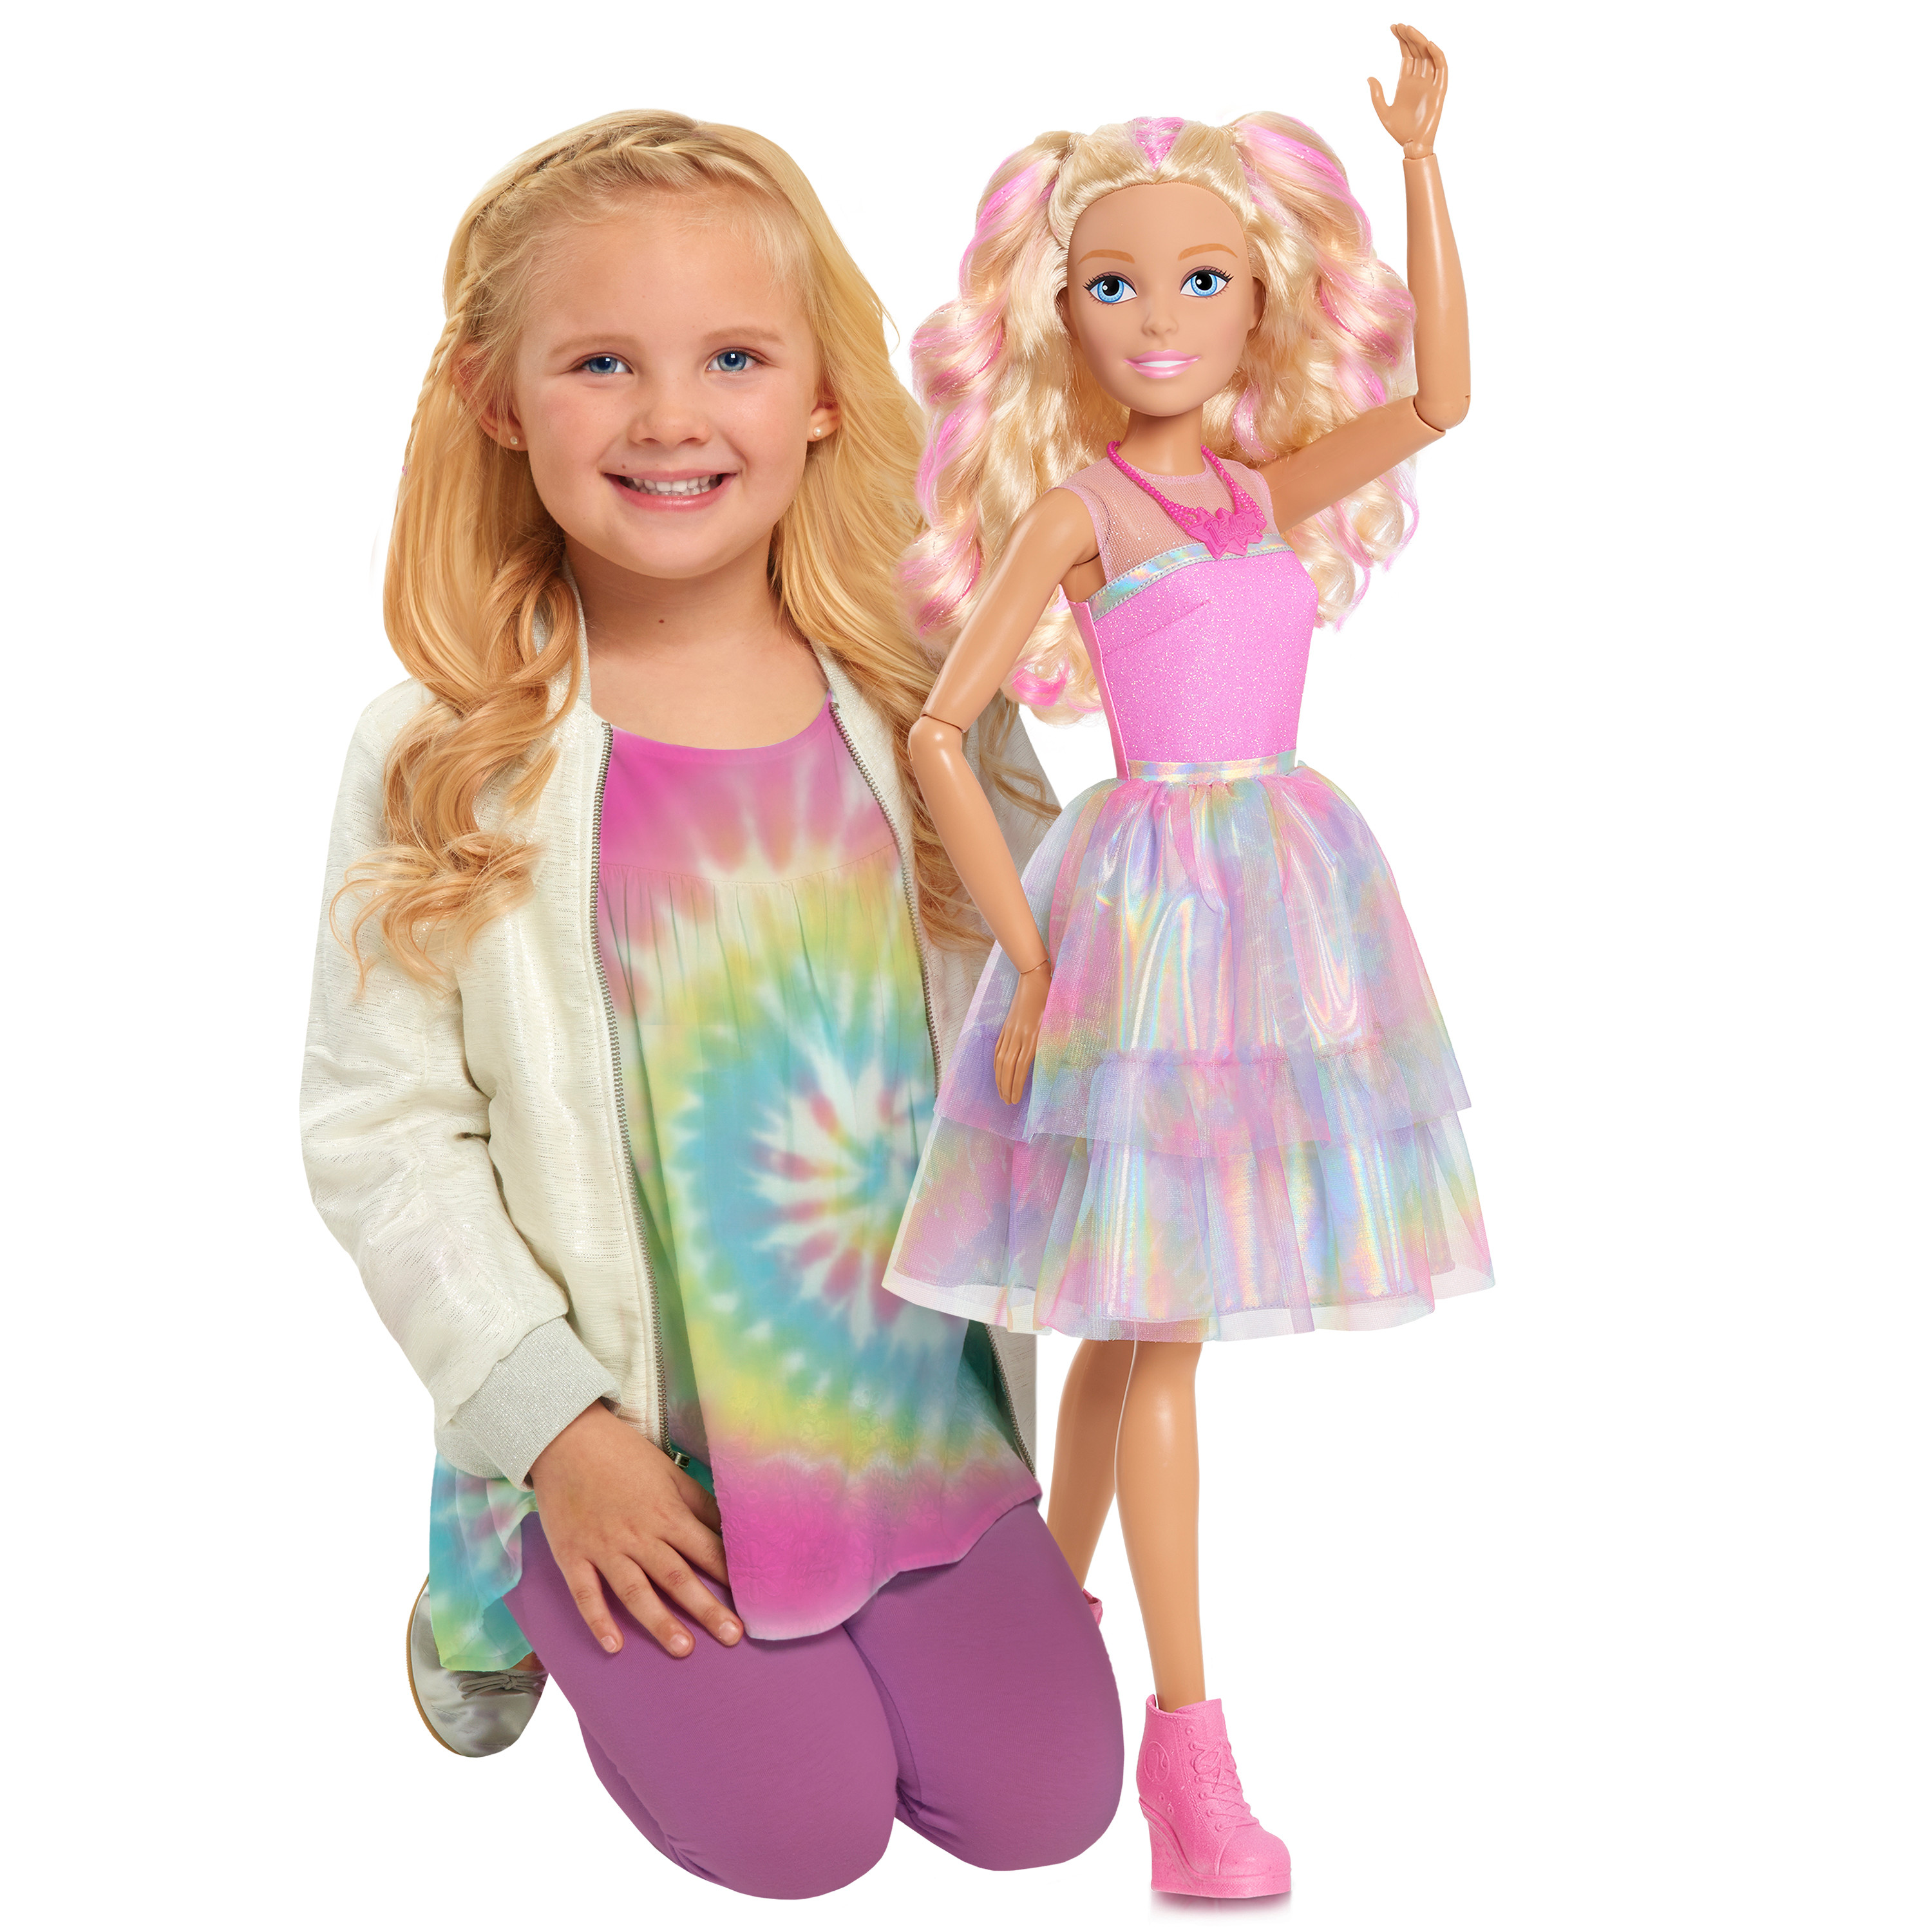 Barbie 28-Inch Tie Dye Style Best Fashion Friend, Blonde Hair,  Kids Toys for Ages 3 Up, Gifts and Presents - image 1 of 10